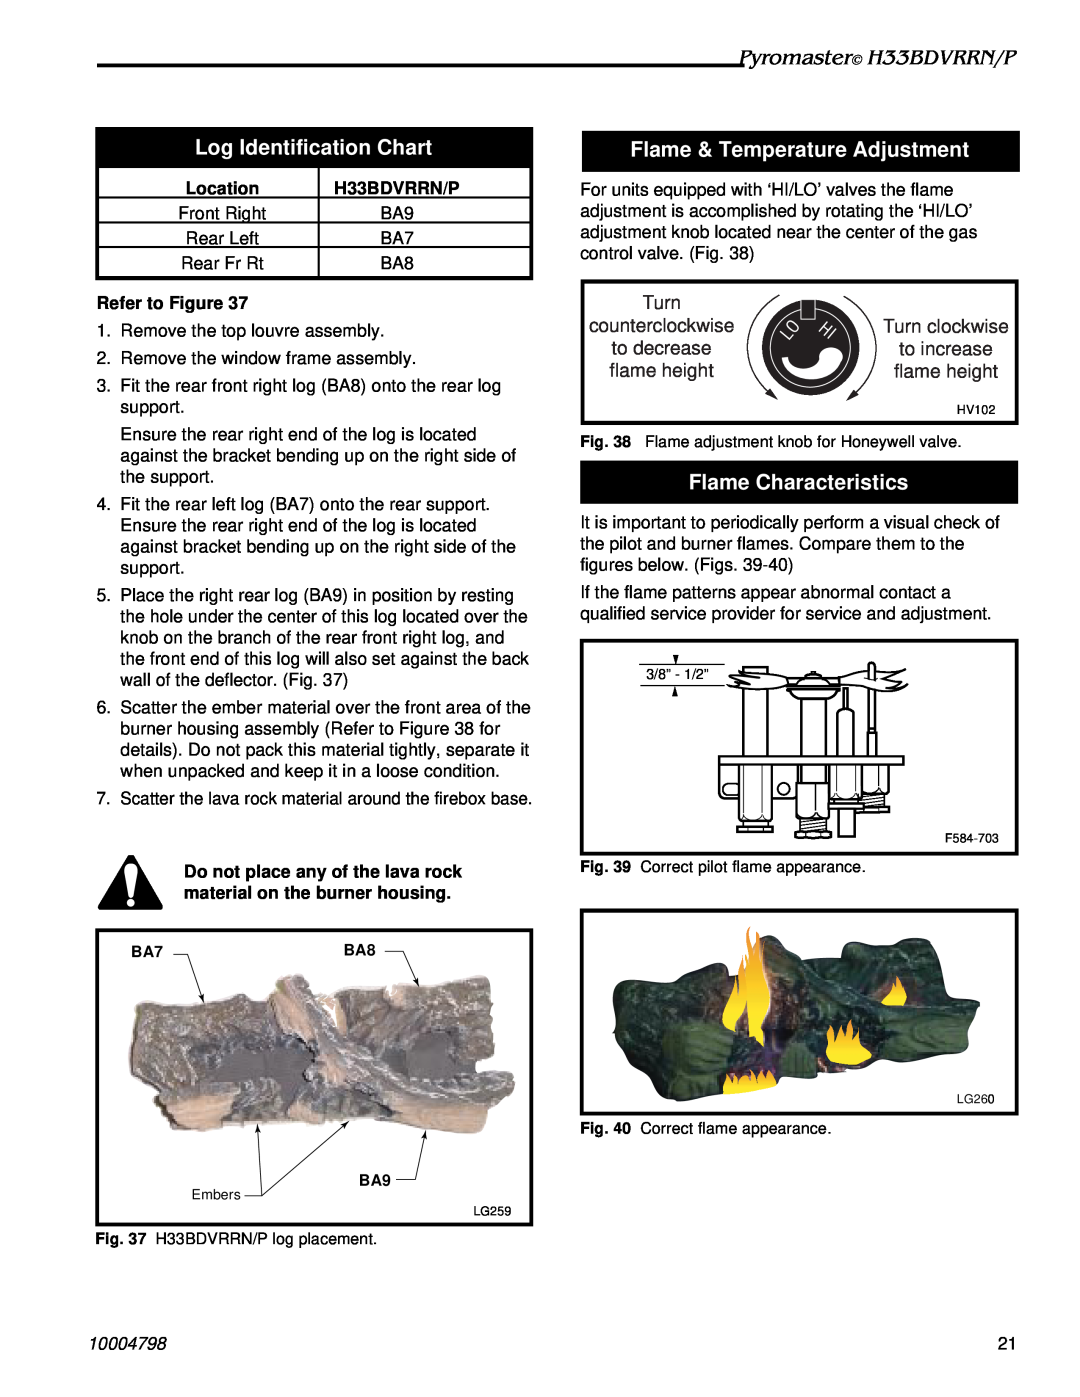 Vermont Casting H33BDVRRN Log Identification Chart, Flame & Temperature Adjustment, Flame Characteristics, Turn, Location 